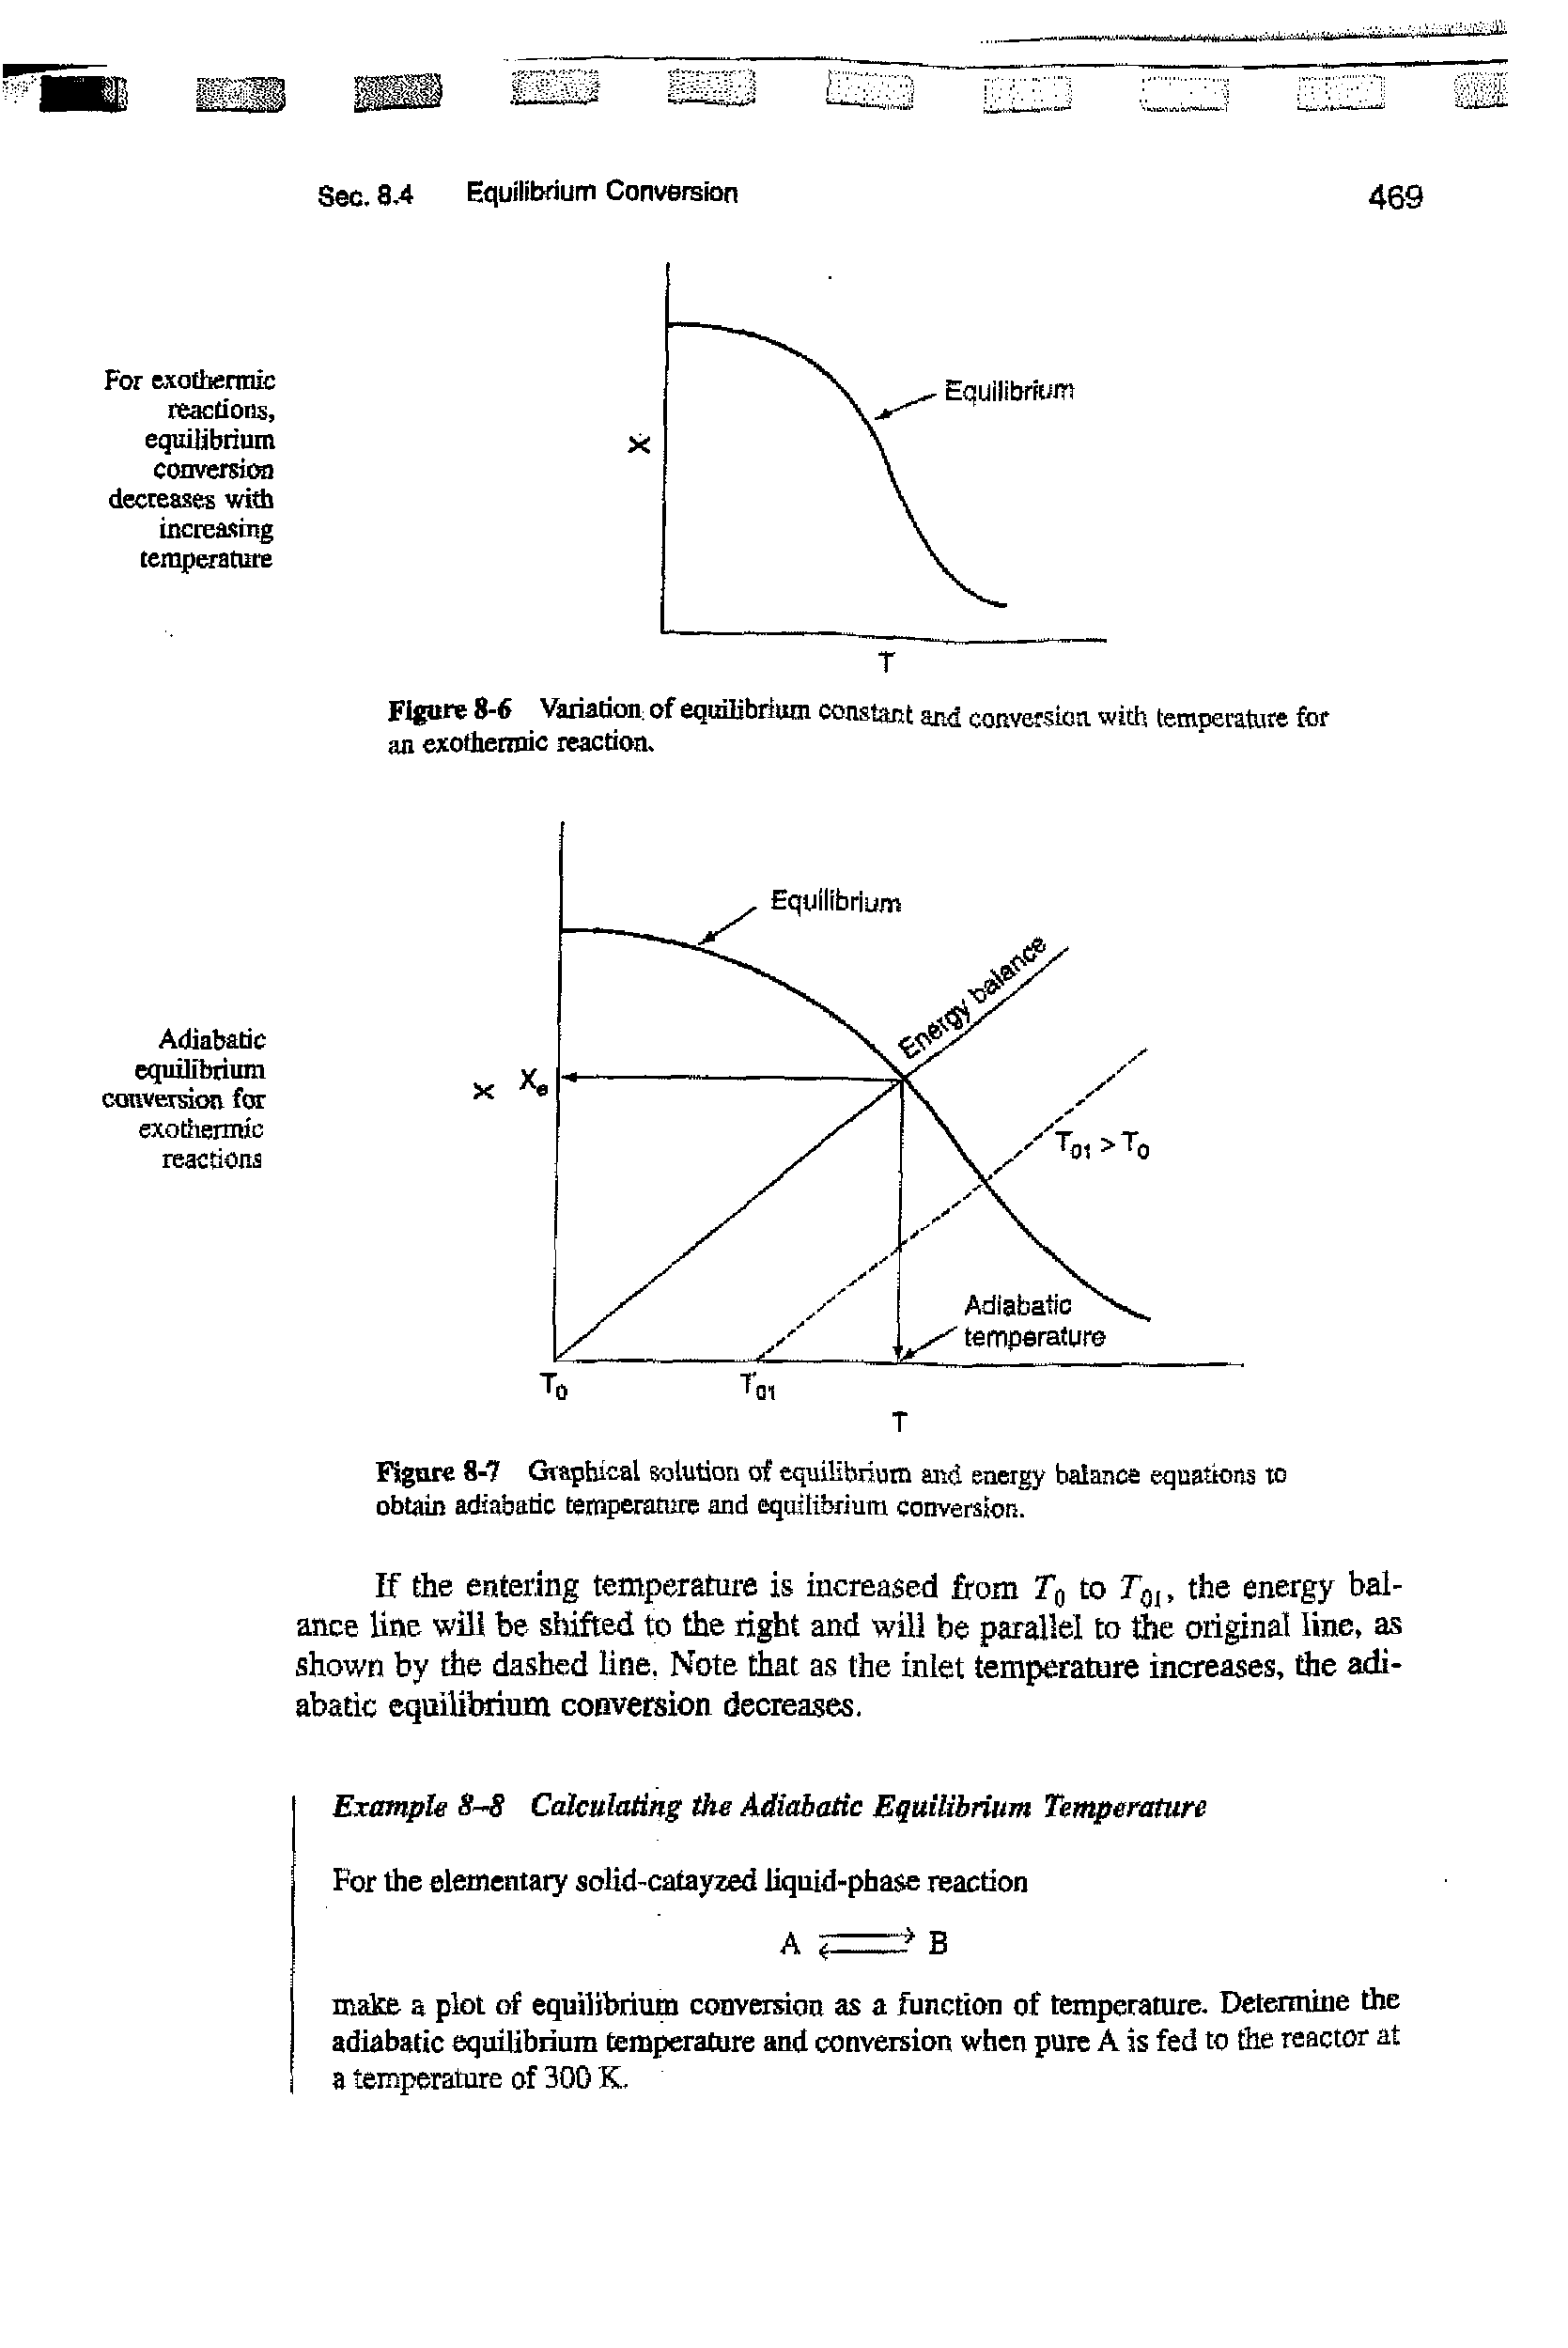 Figure 8-7 Graphical solution of equilibrium and energy balance equations to obtain adiabatic temperature and equilibrium conversion.